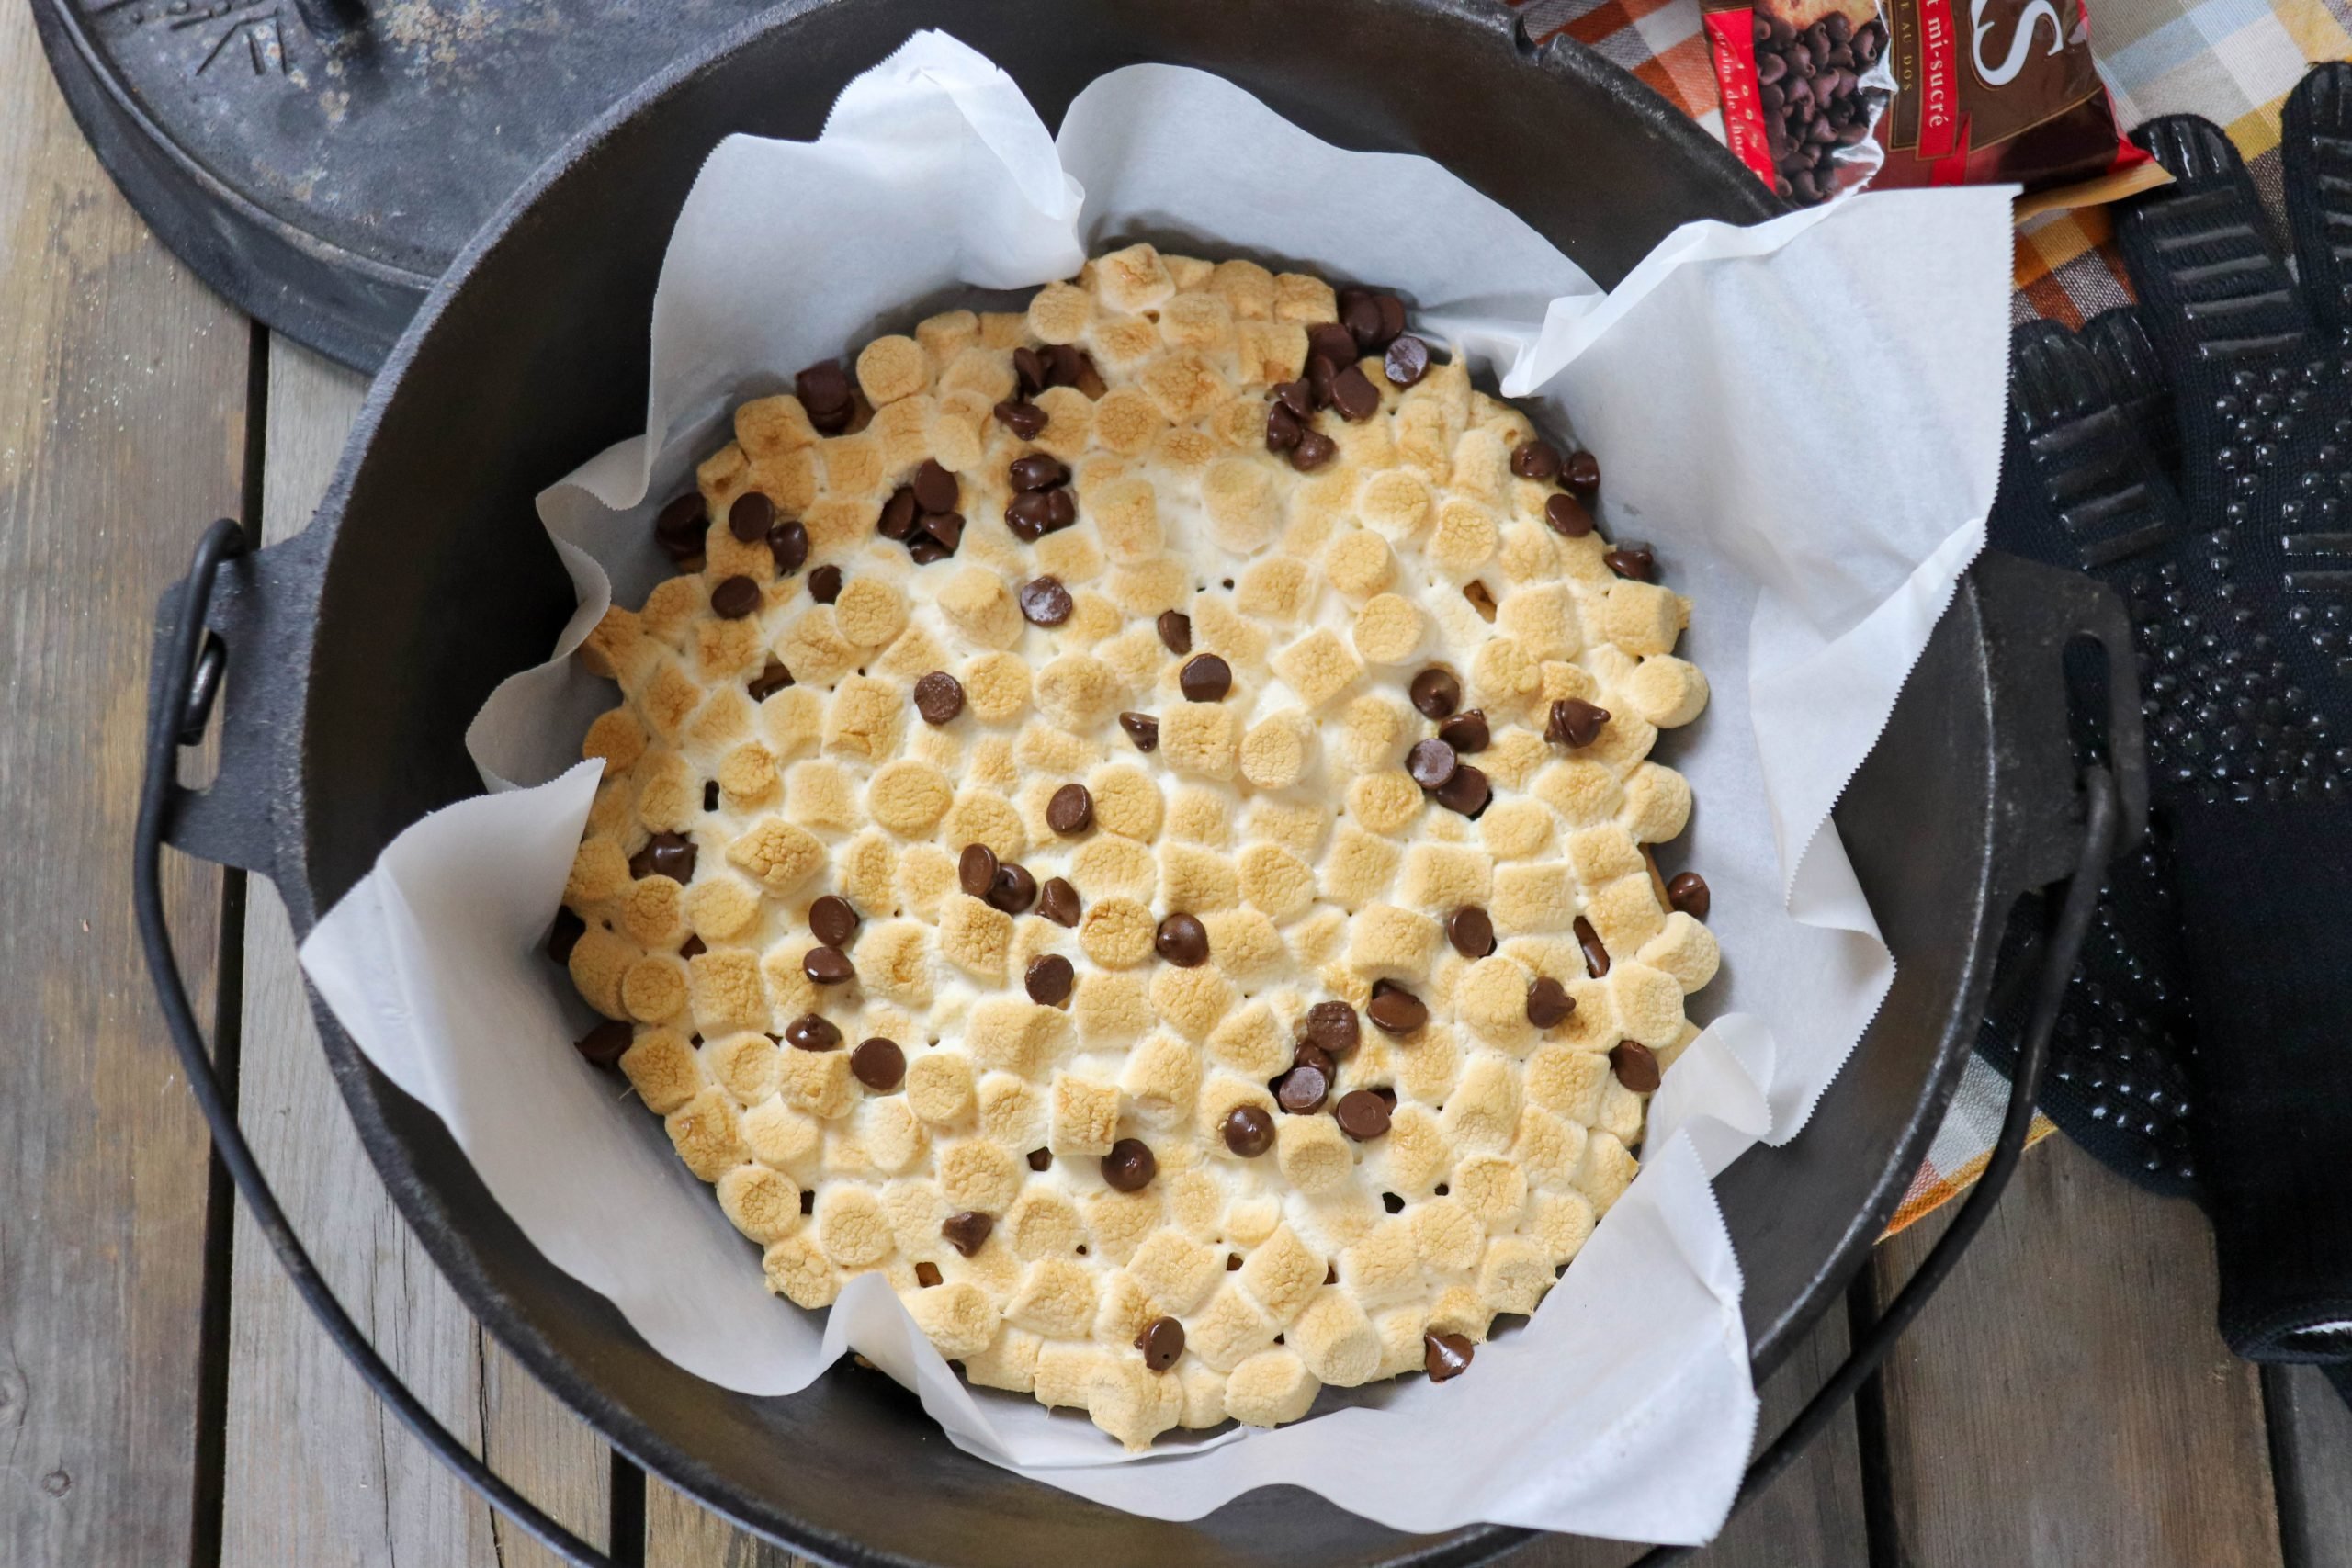 https://campfirefoodie.com/wp-content/uploads/2021/02/Dutch-Oven-Smores-Recipe-6-scaled.jpg